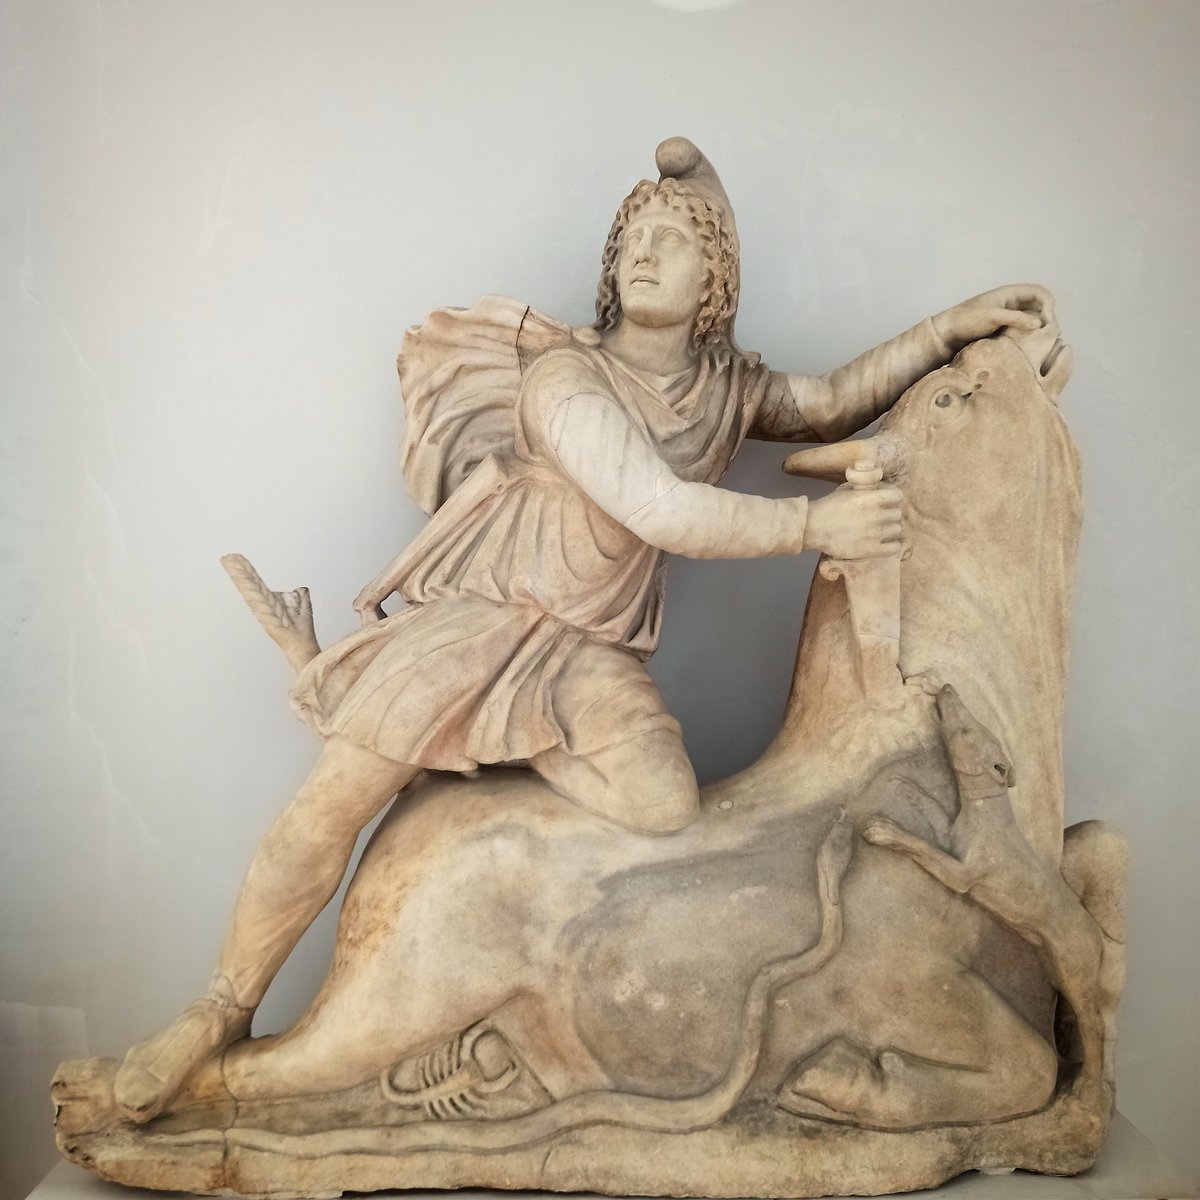 #ReliefWednesday Mithras slaying the bull, late 2nd - early 3rd century AD, from Rome, Girolamo Zulian collection, on display in room 1 #museum #Venice #Archaeology #sculpture